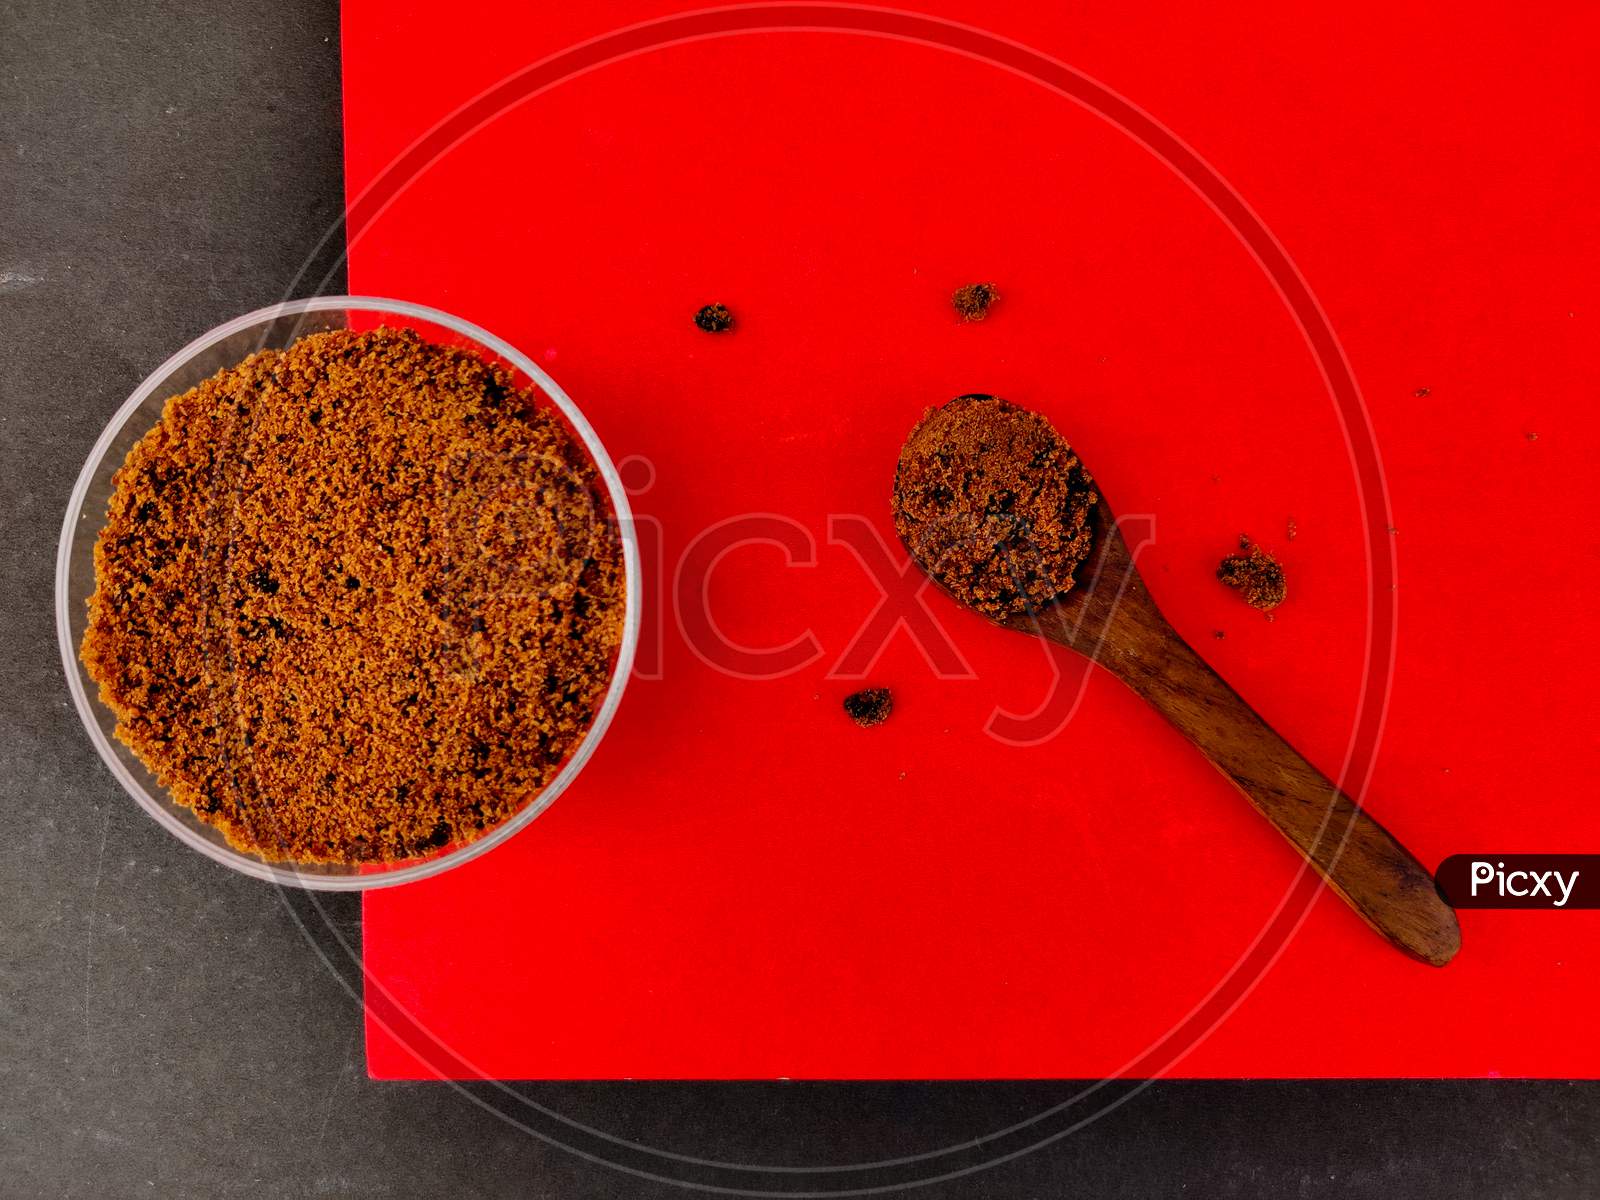 Top View Of Brown Sugar In Small Glass Bowl And Wooden Spoon. Isolated On Red And Black Background